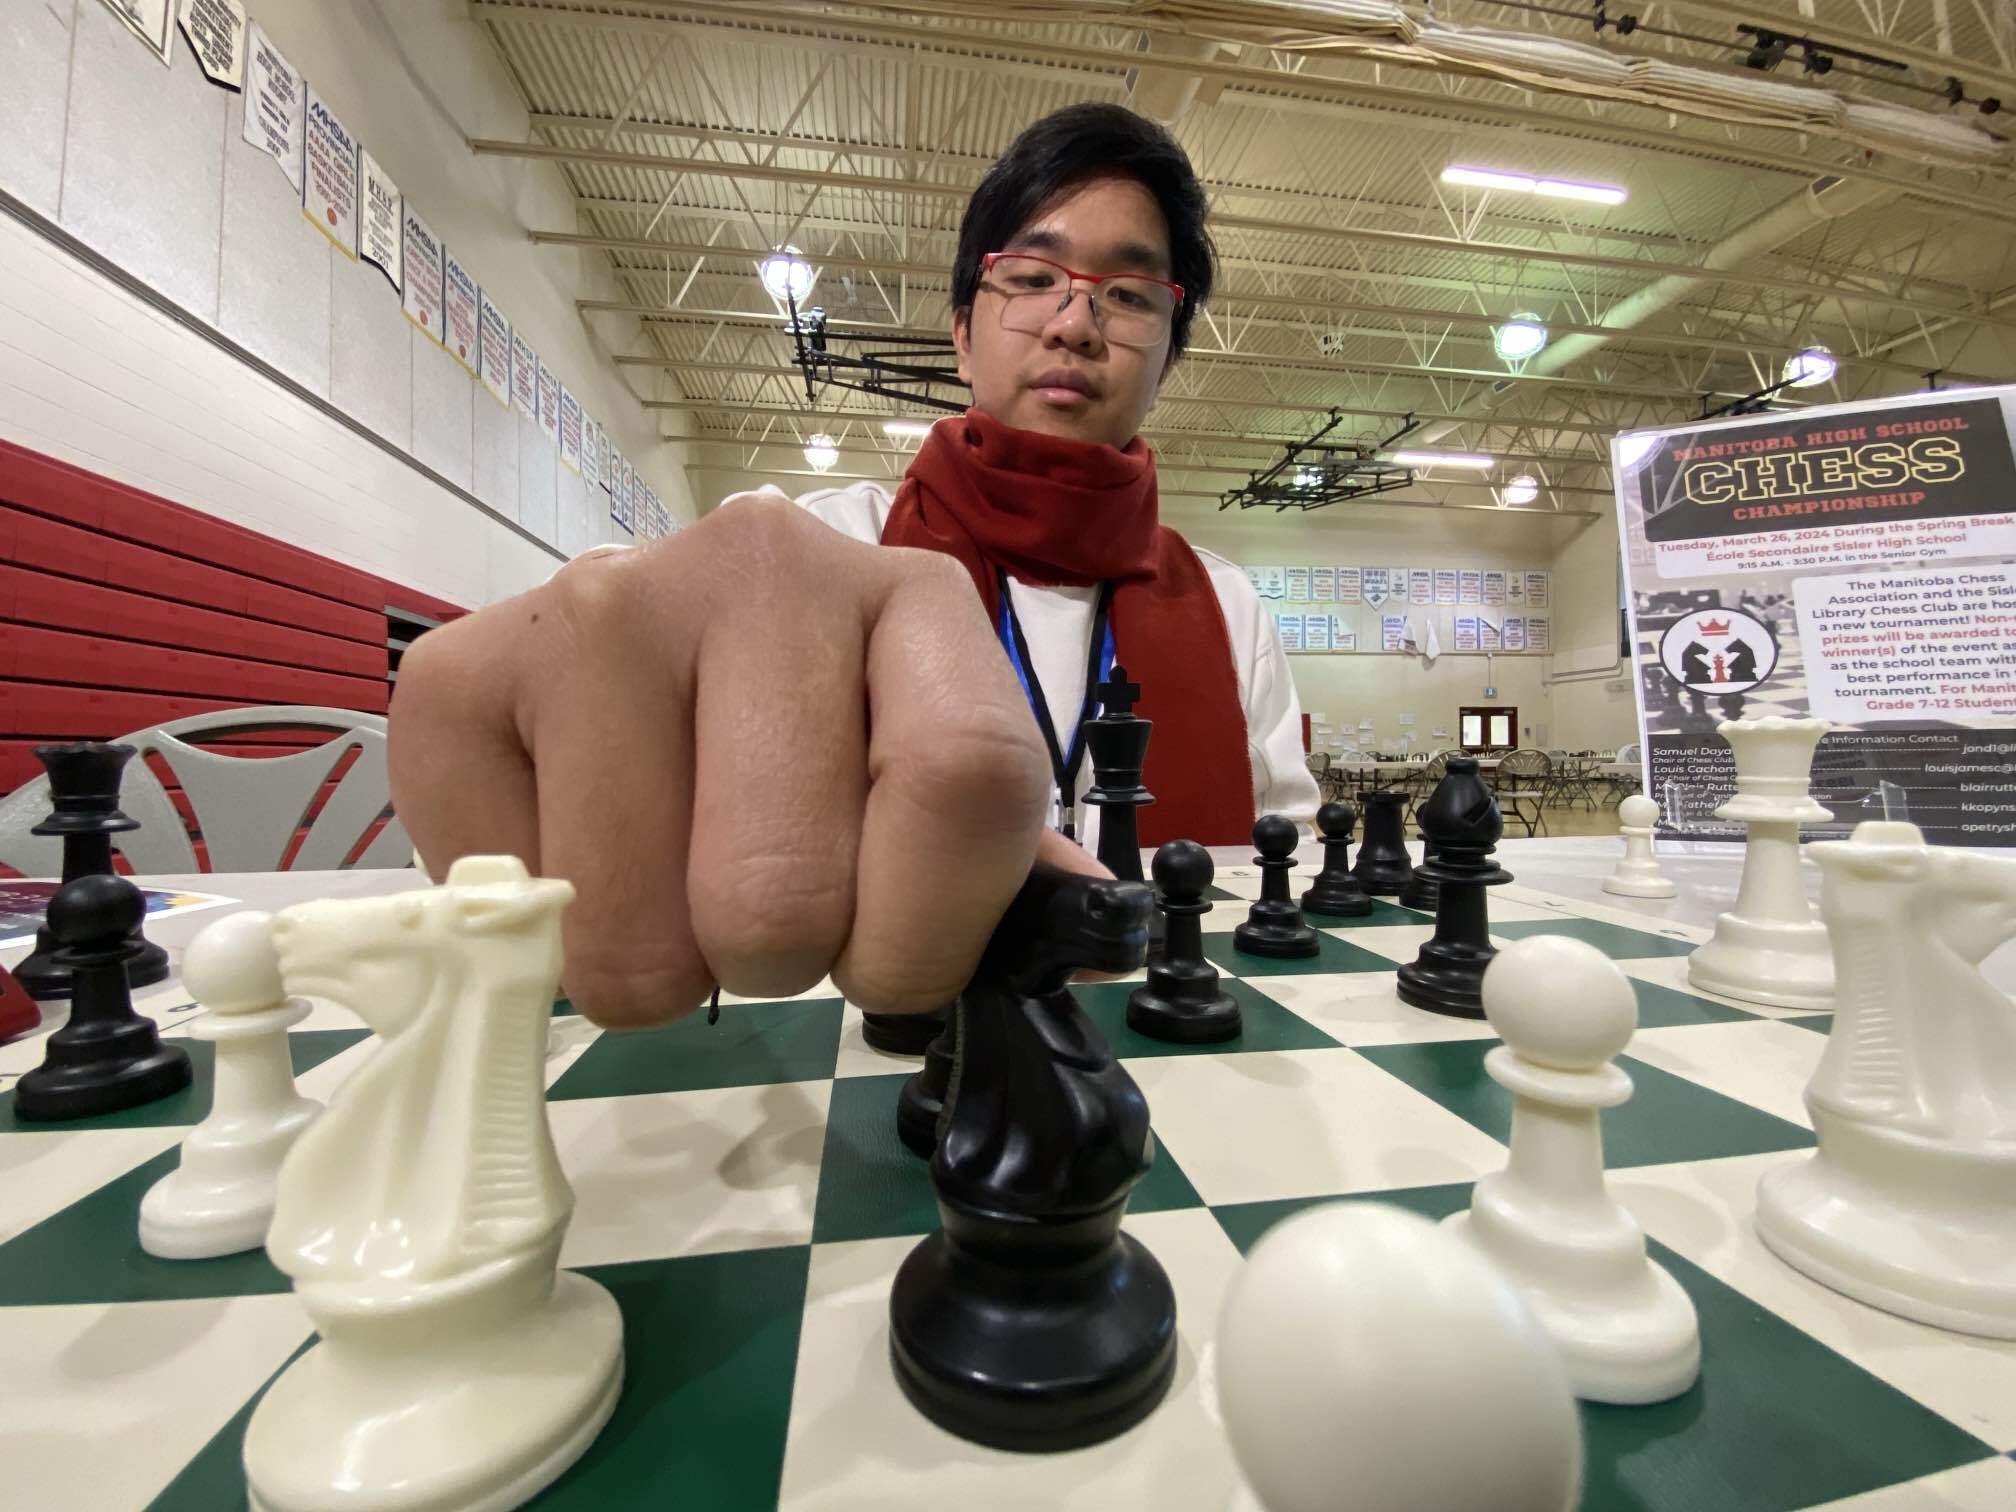 Winnipeg students come together for third annual Manitoba chess championship